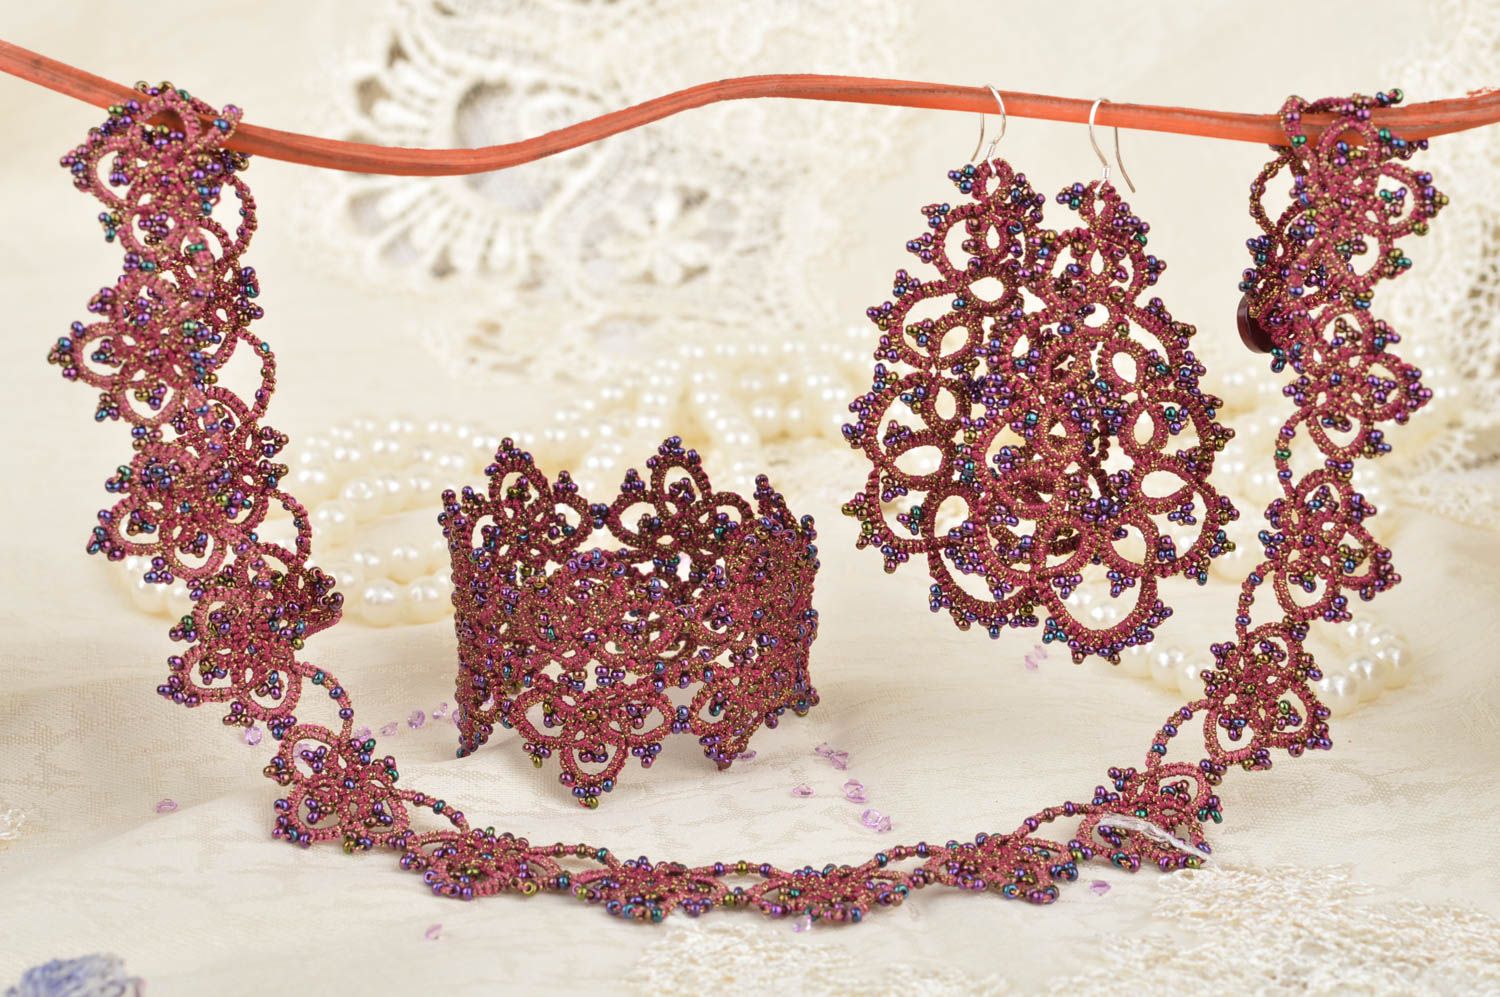 Handmade purple lace tatted jewelry set 3 items earrings bracelet and necklace photo 1